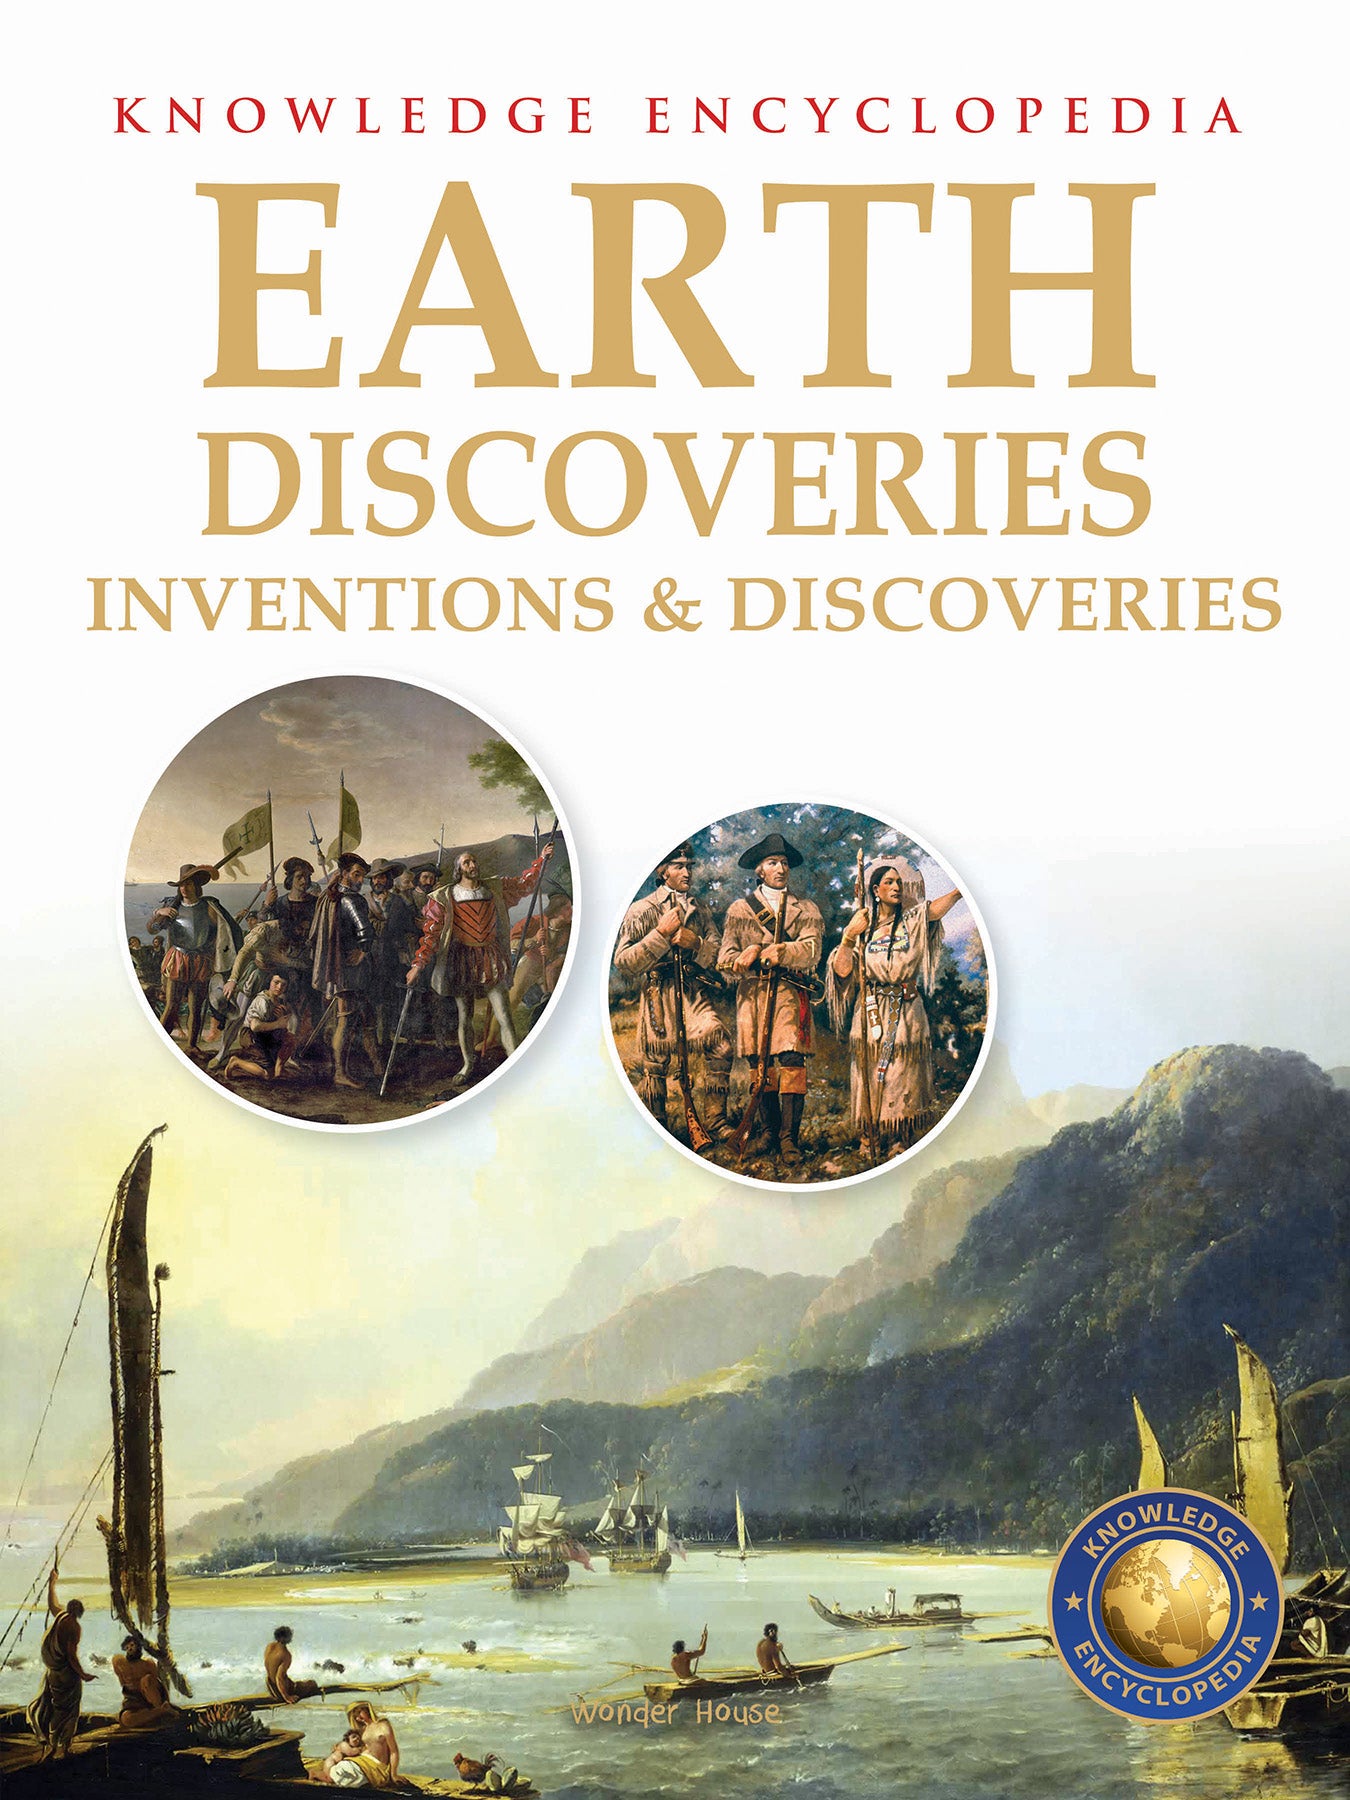 Inventions & Discoveries - Earth Discoveries: Knowledge Encyclopedia For Children